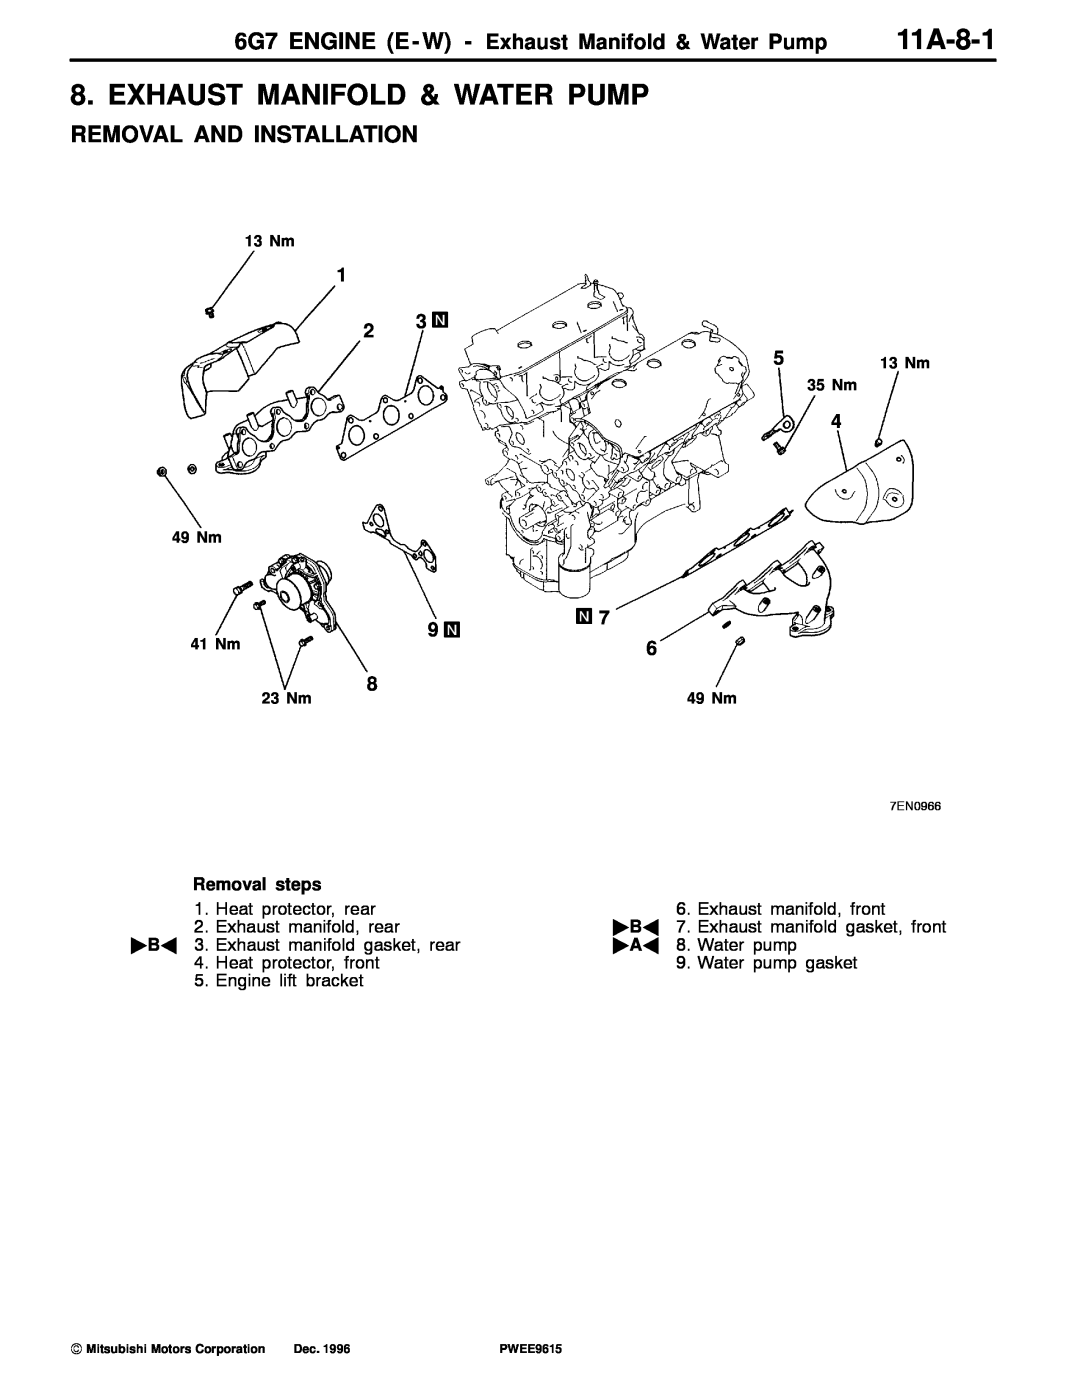 Mitsubishi 11A-8-1, 6G7 ENGINE E - W - Exhaust Manifold & Water Pump, Removal And Installation, Removal steps 